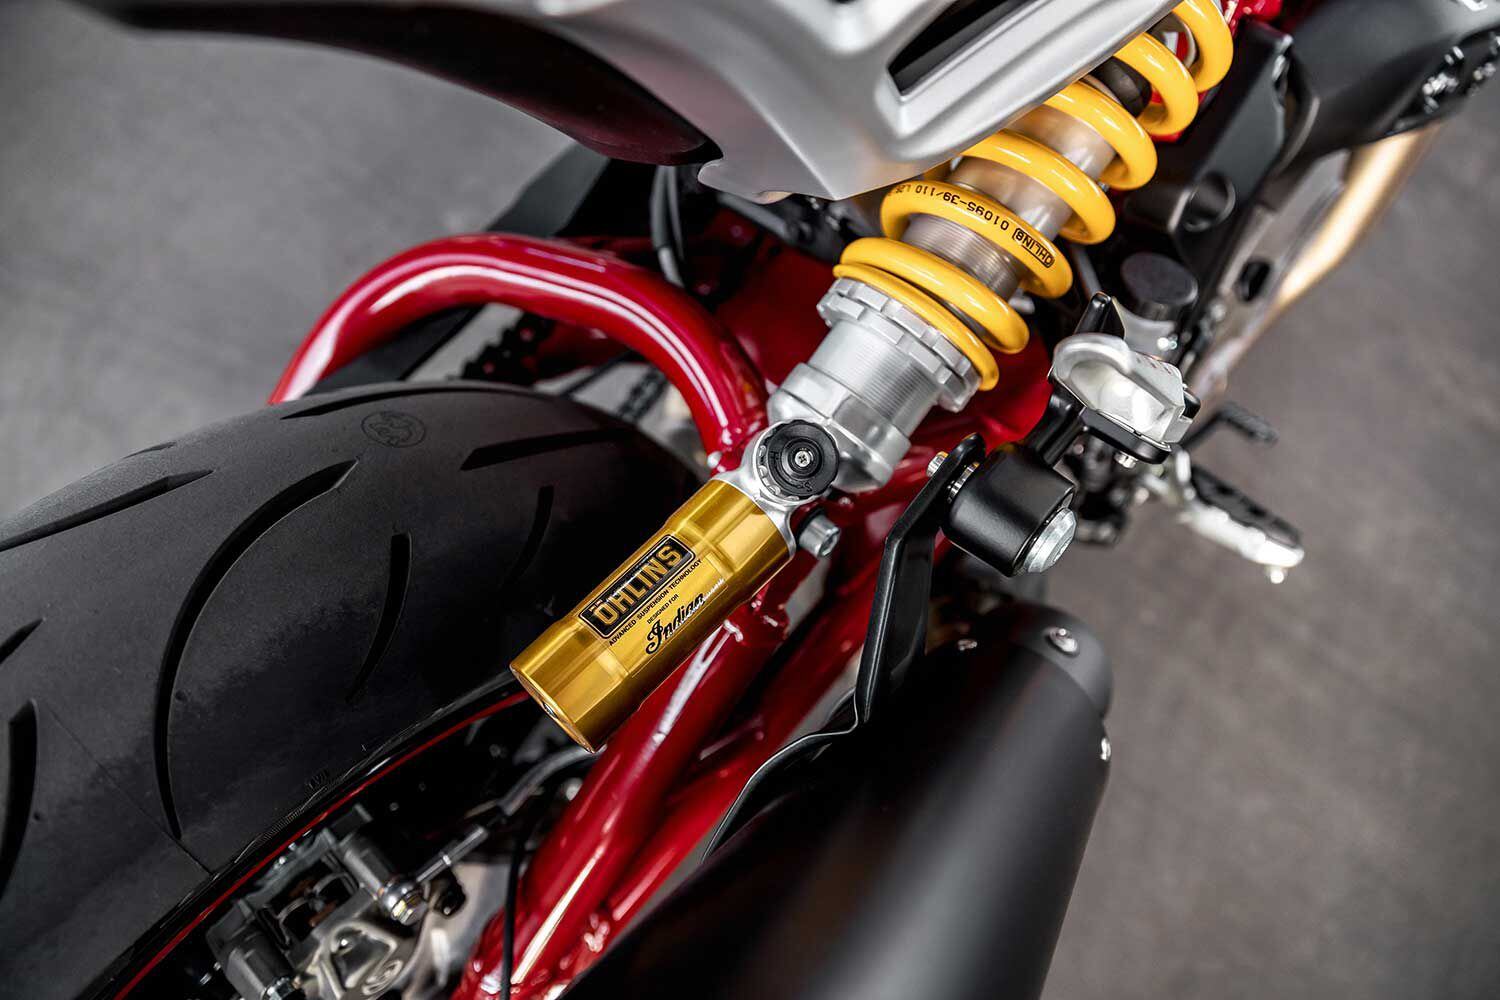 The top-of-the-line FTR R Carbon swaps out Sachs suspension for an Öhlins setup.